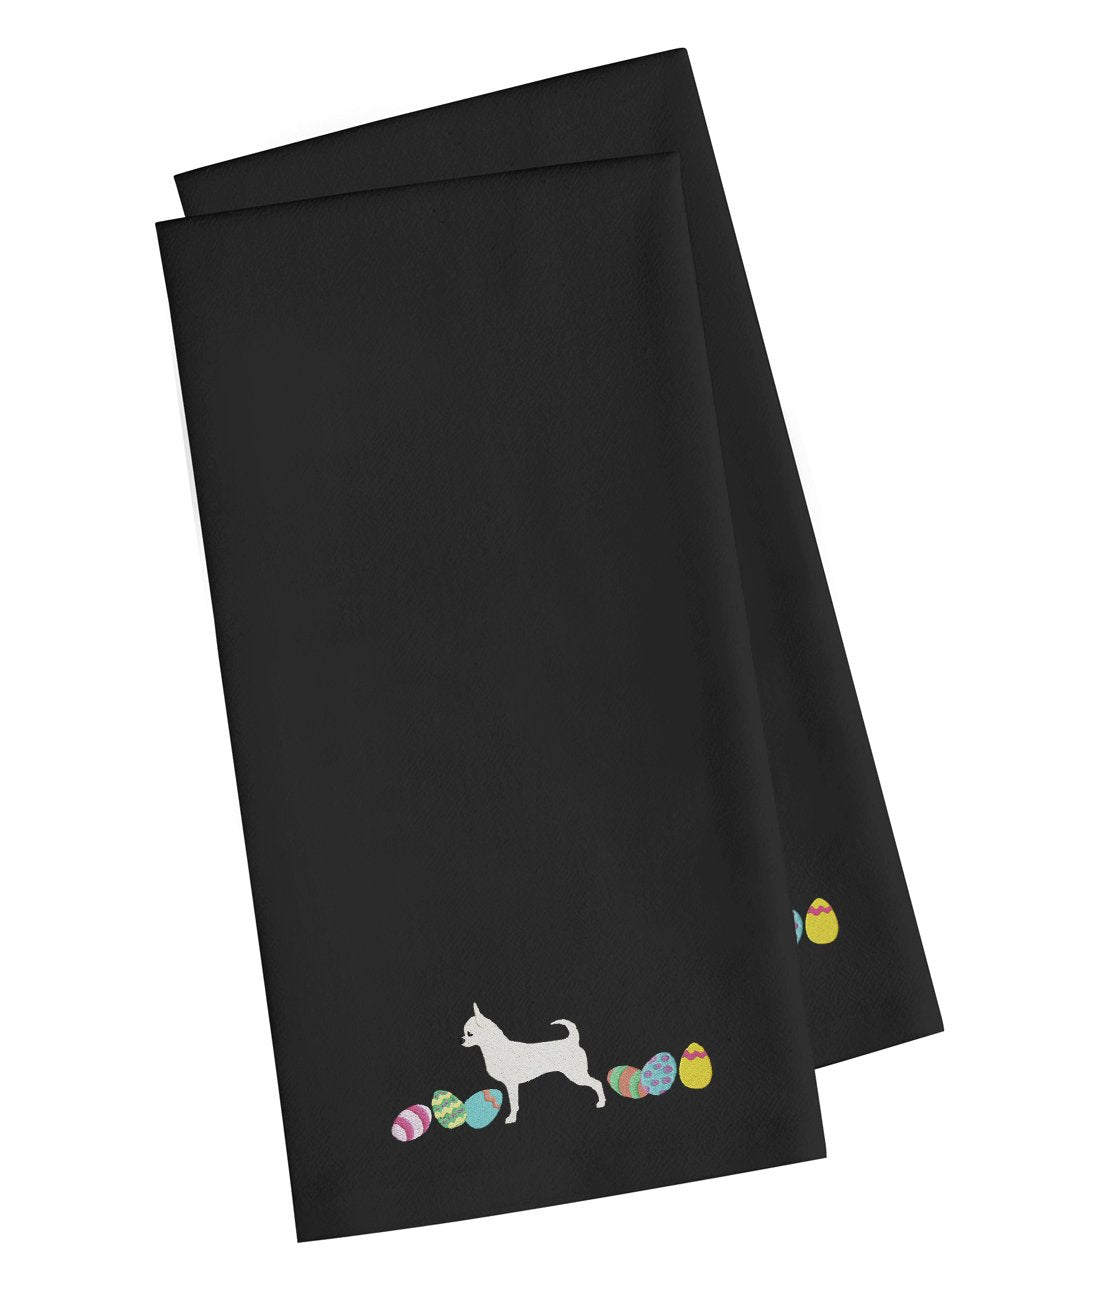 Chihuahua Easter Black Embroidered Kitchen Towel Set of 2 CK1624BKTWE by Caroline's Treasures